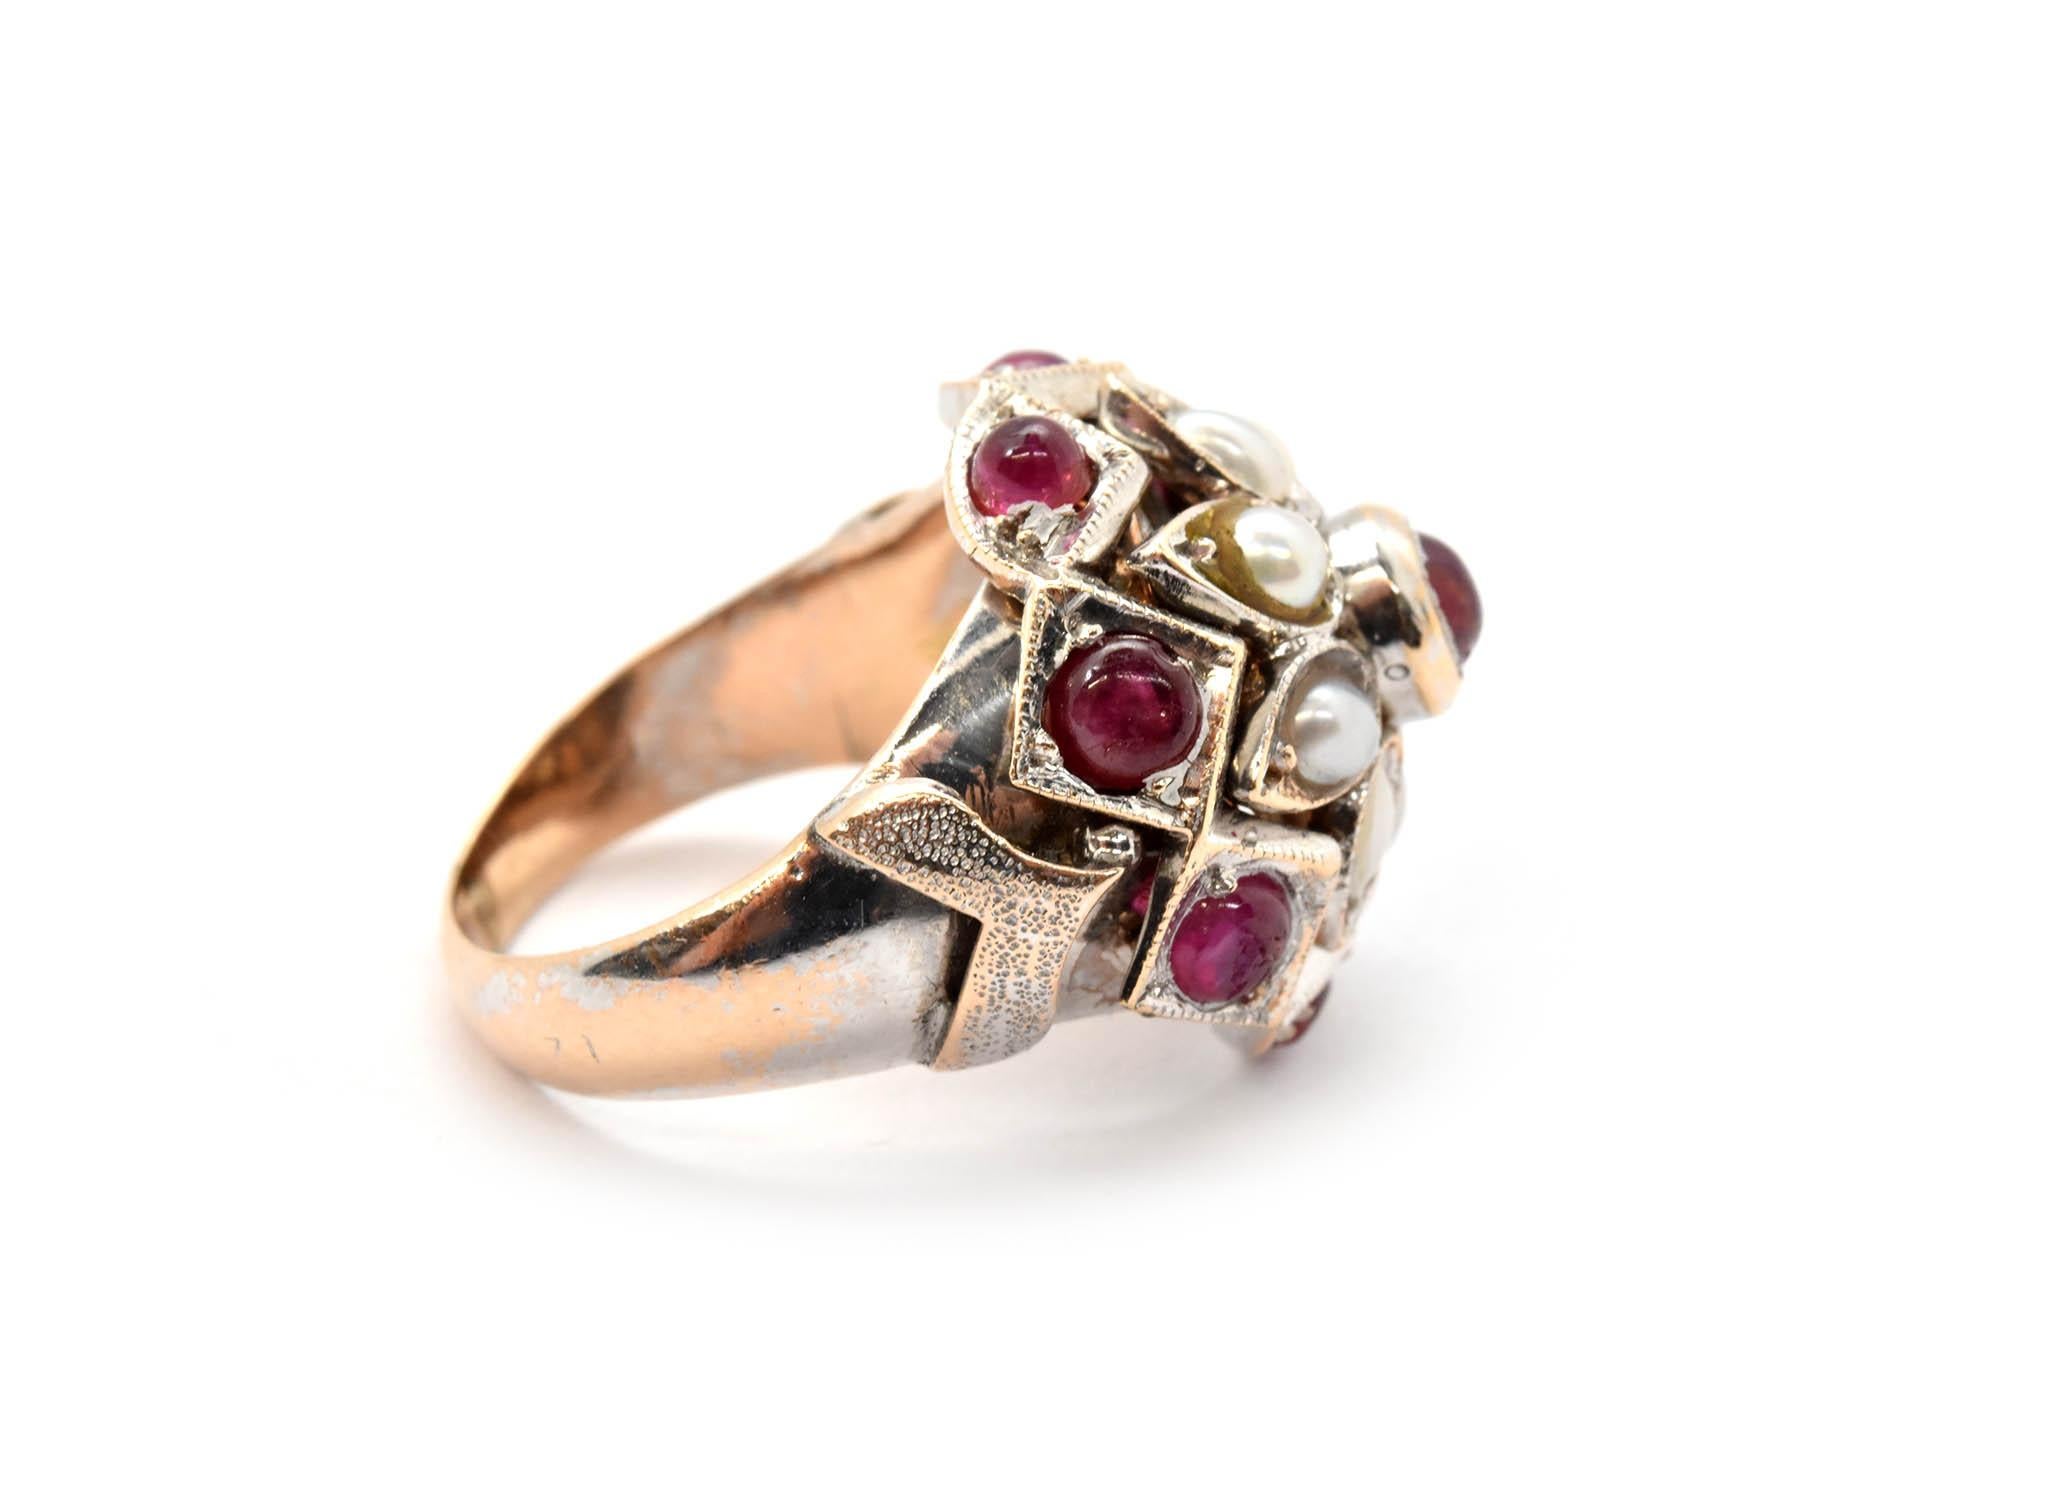 This ring is made in solid 14k white gold. It features a pattern of rubies and pearls in the center. The ring measures 17mm wide, and it weighs 9.08 grams. It is a size 5.